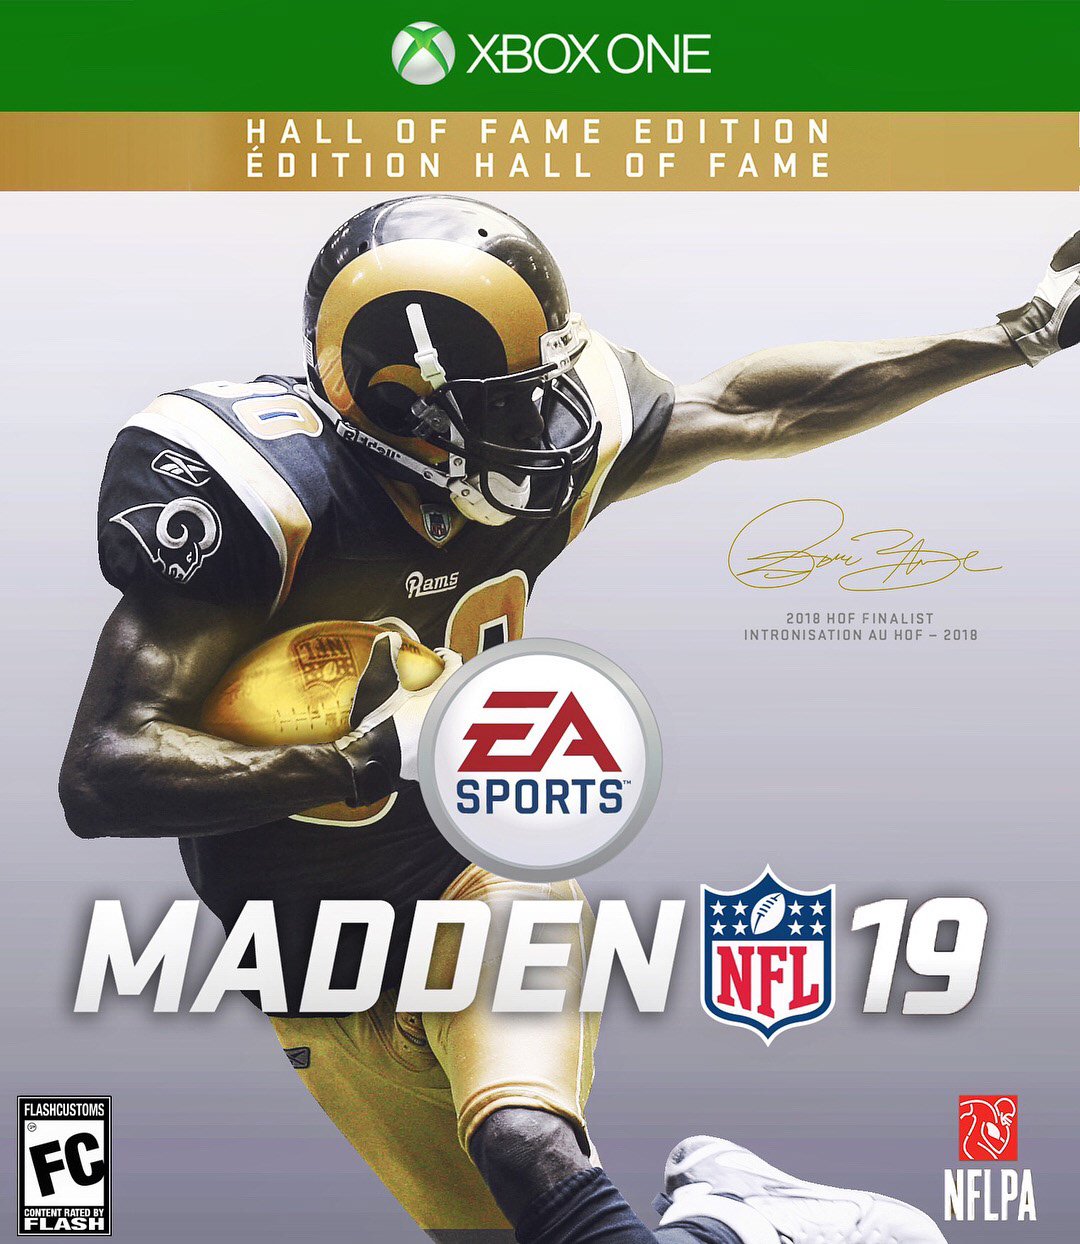 Madden 19 concept cover on Behance